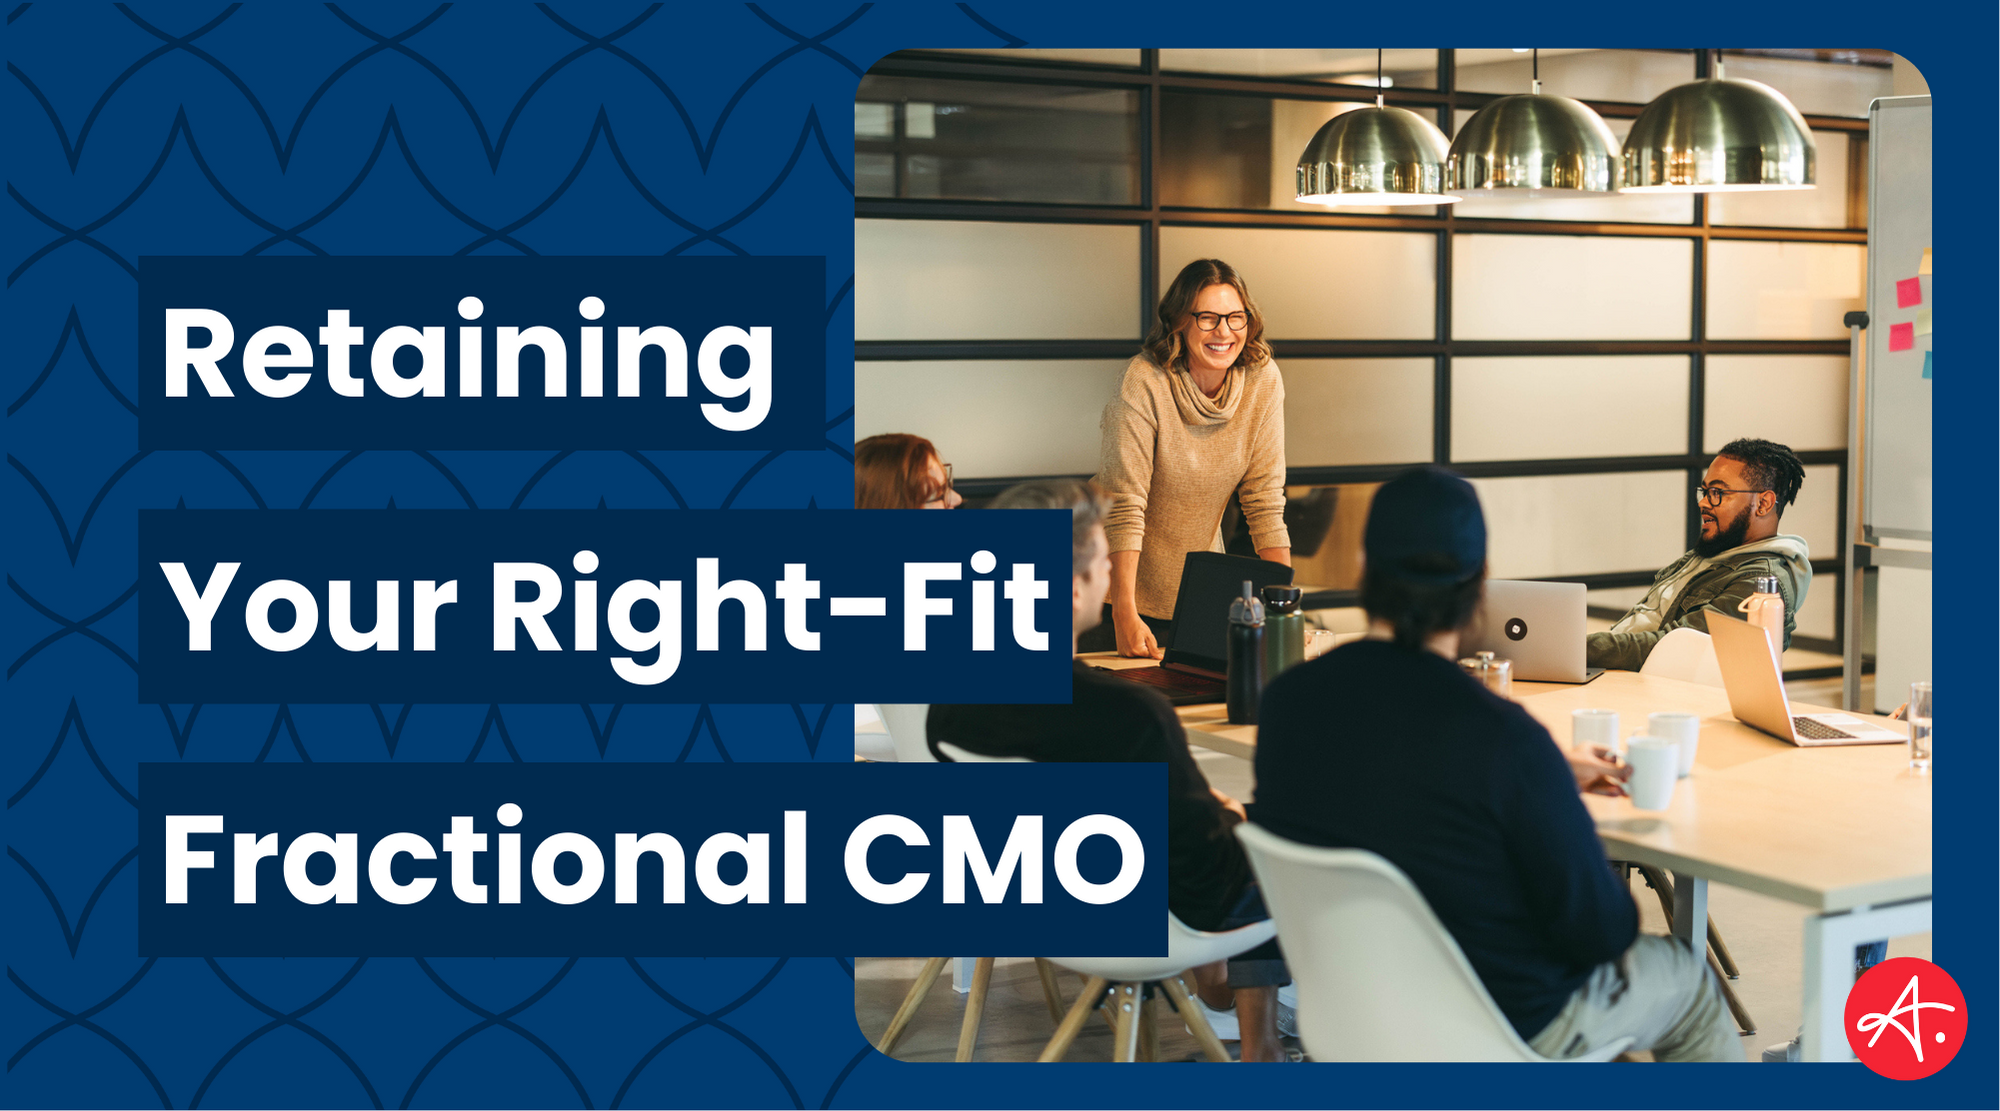 Retaining Your Right-Fit Fractional CMO